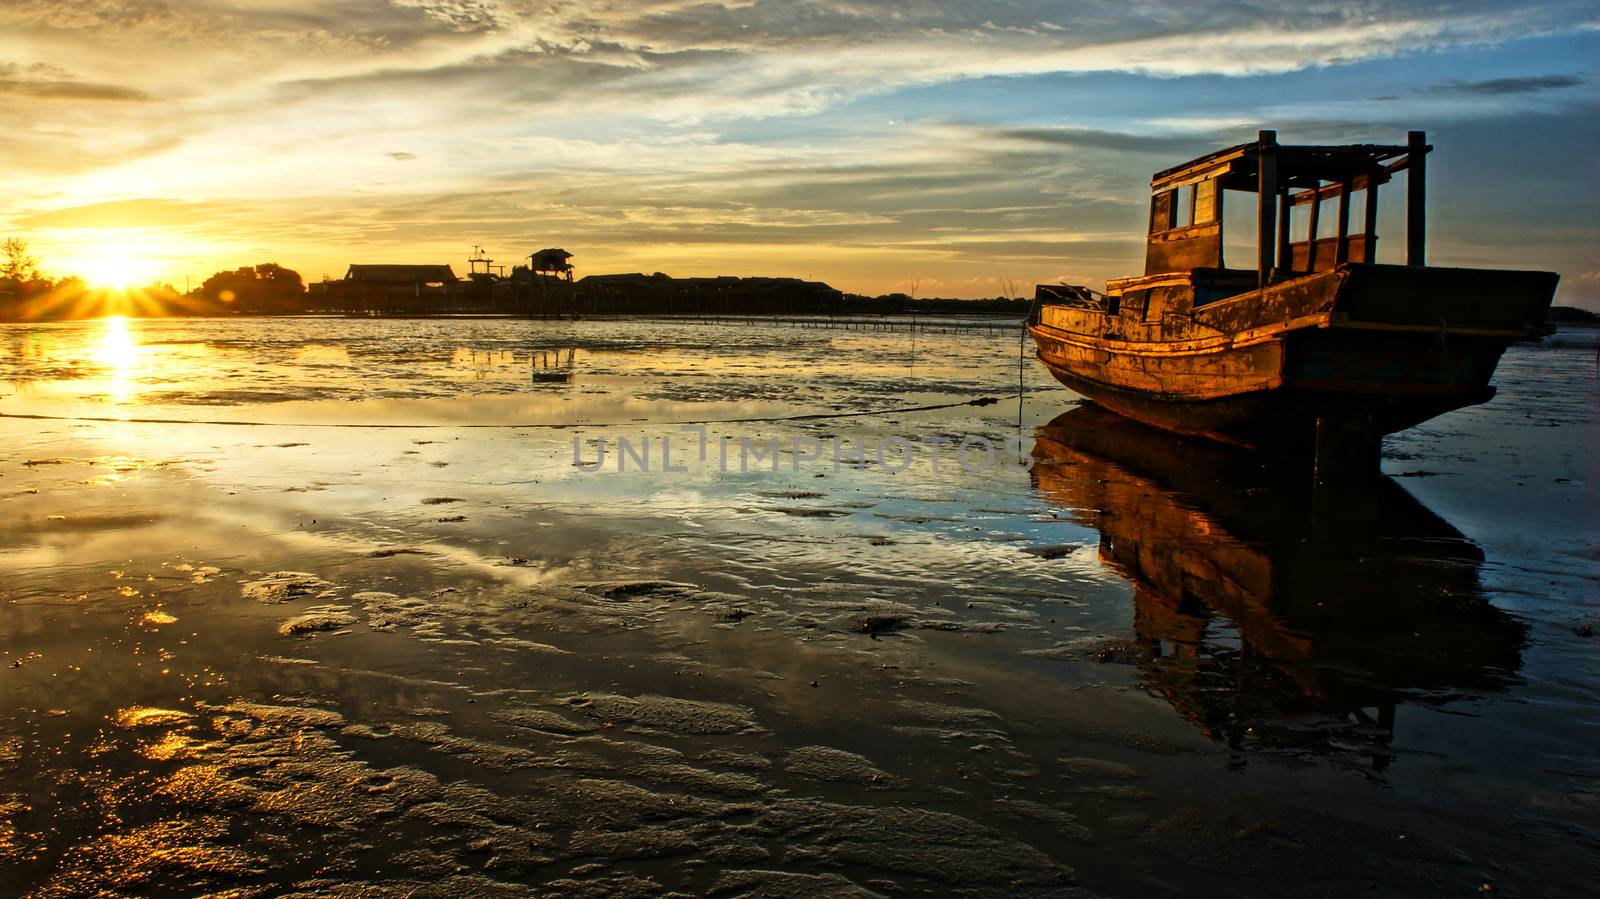 Abstract landscape of sea when sunset, tide going out, sun go down, sunbeam shine on wooden fishing boat that reflect on surface water of beach, colorful sky at evening scene 